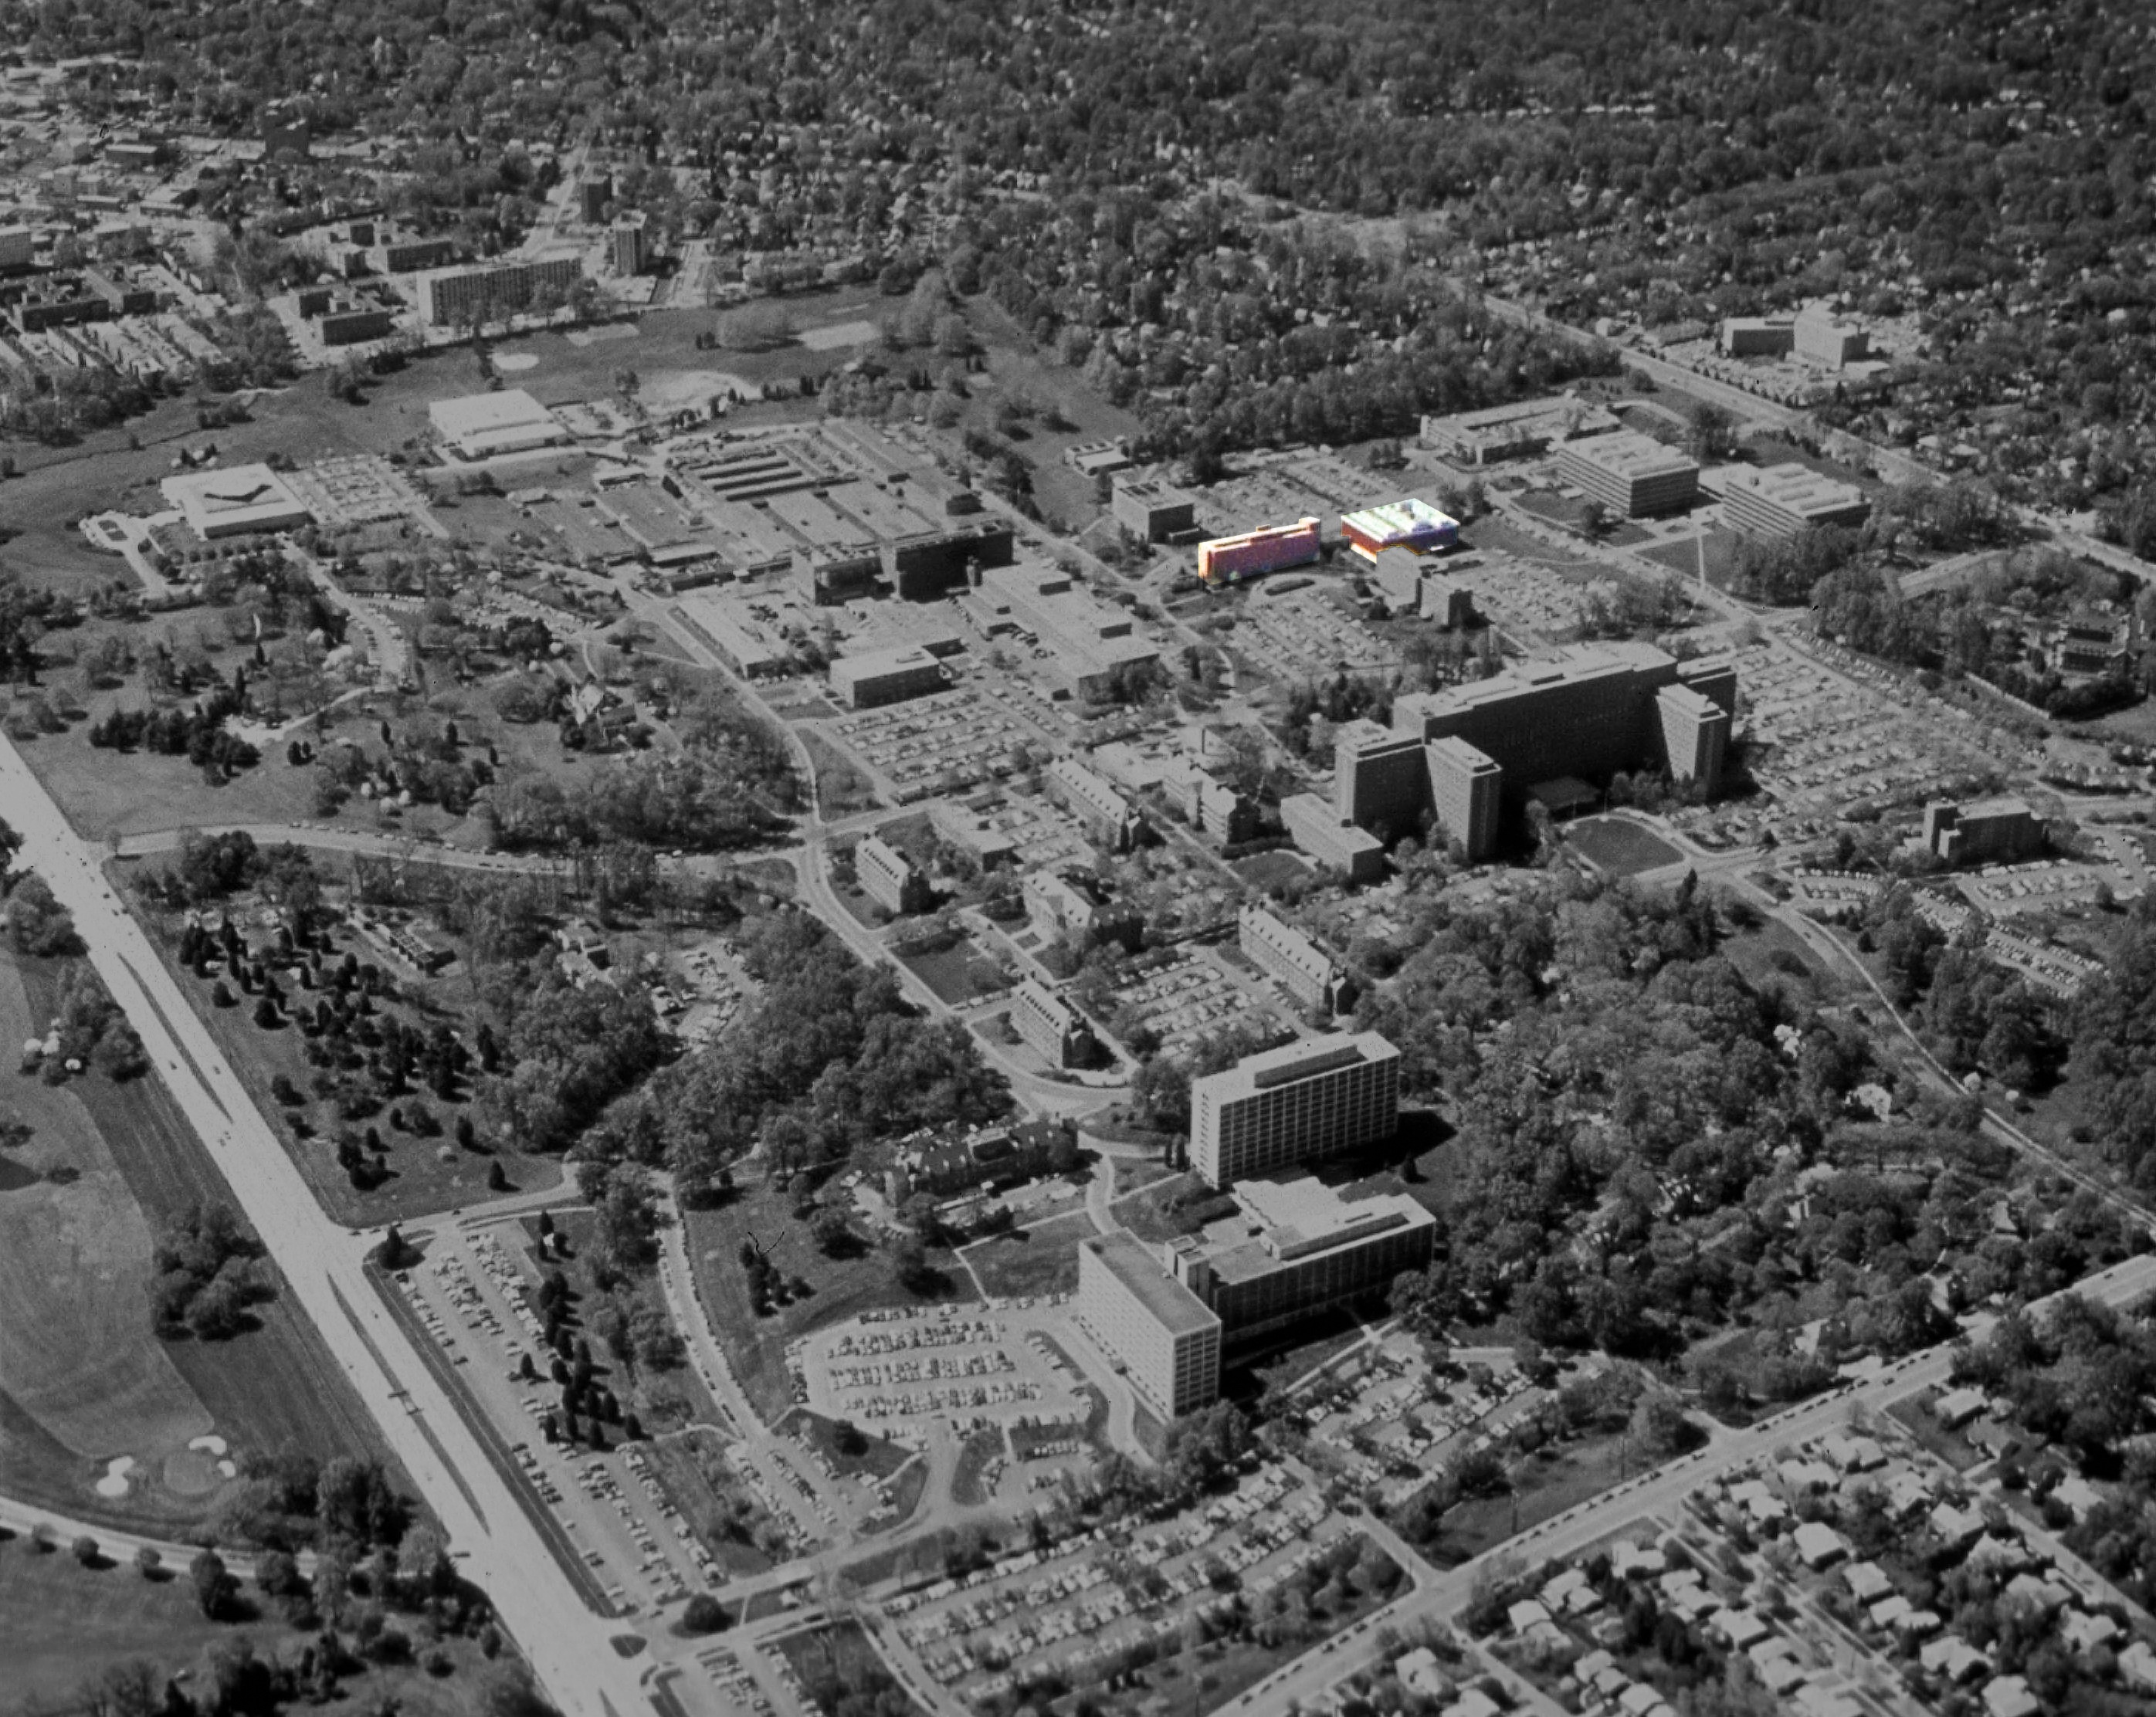 Aerial Image of the NIH campus from around 1975